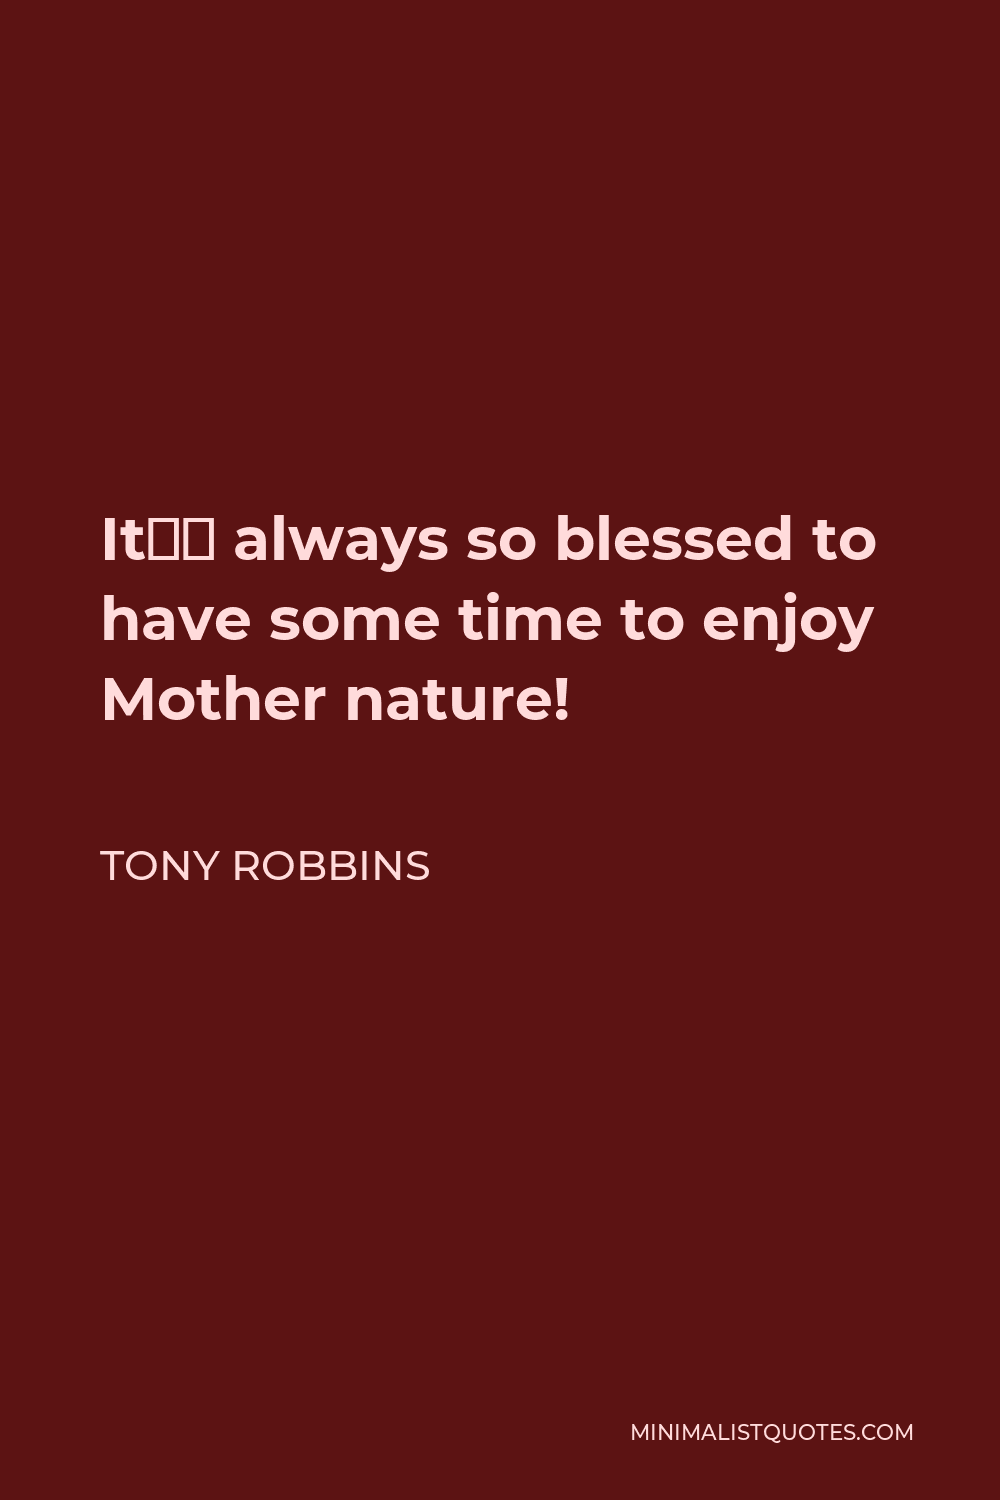 Tony Robbins Quote - It’s always so blessed to have some time to enjoy Mother nature!